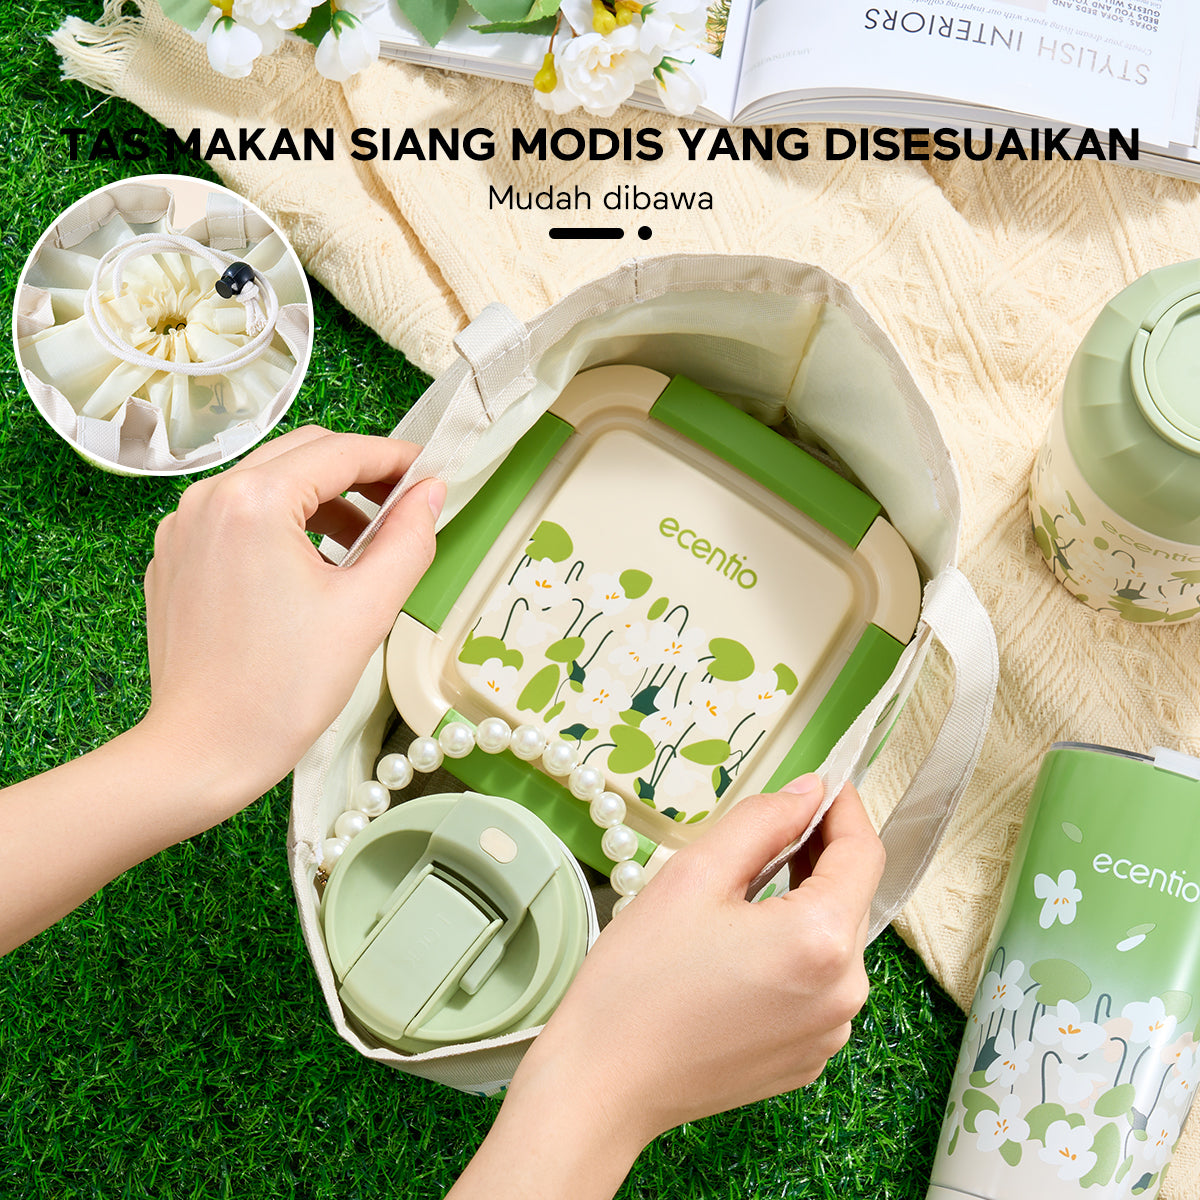 ecentio green whispers series lunch box set 3pcs